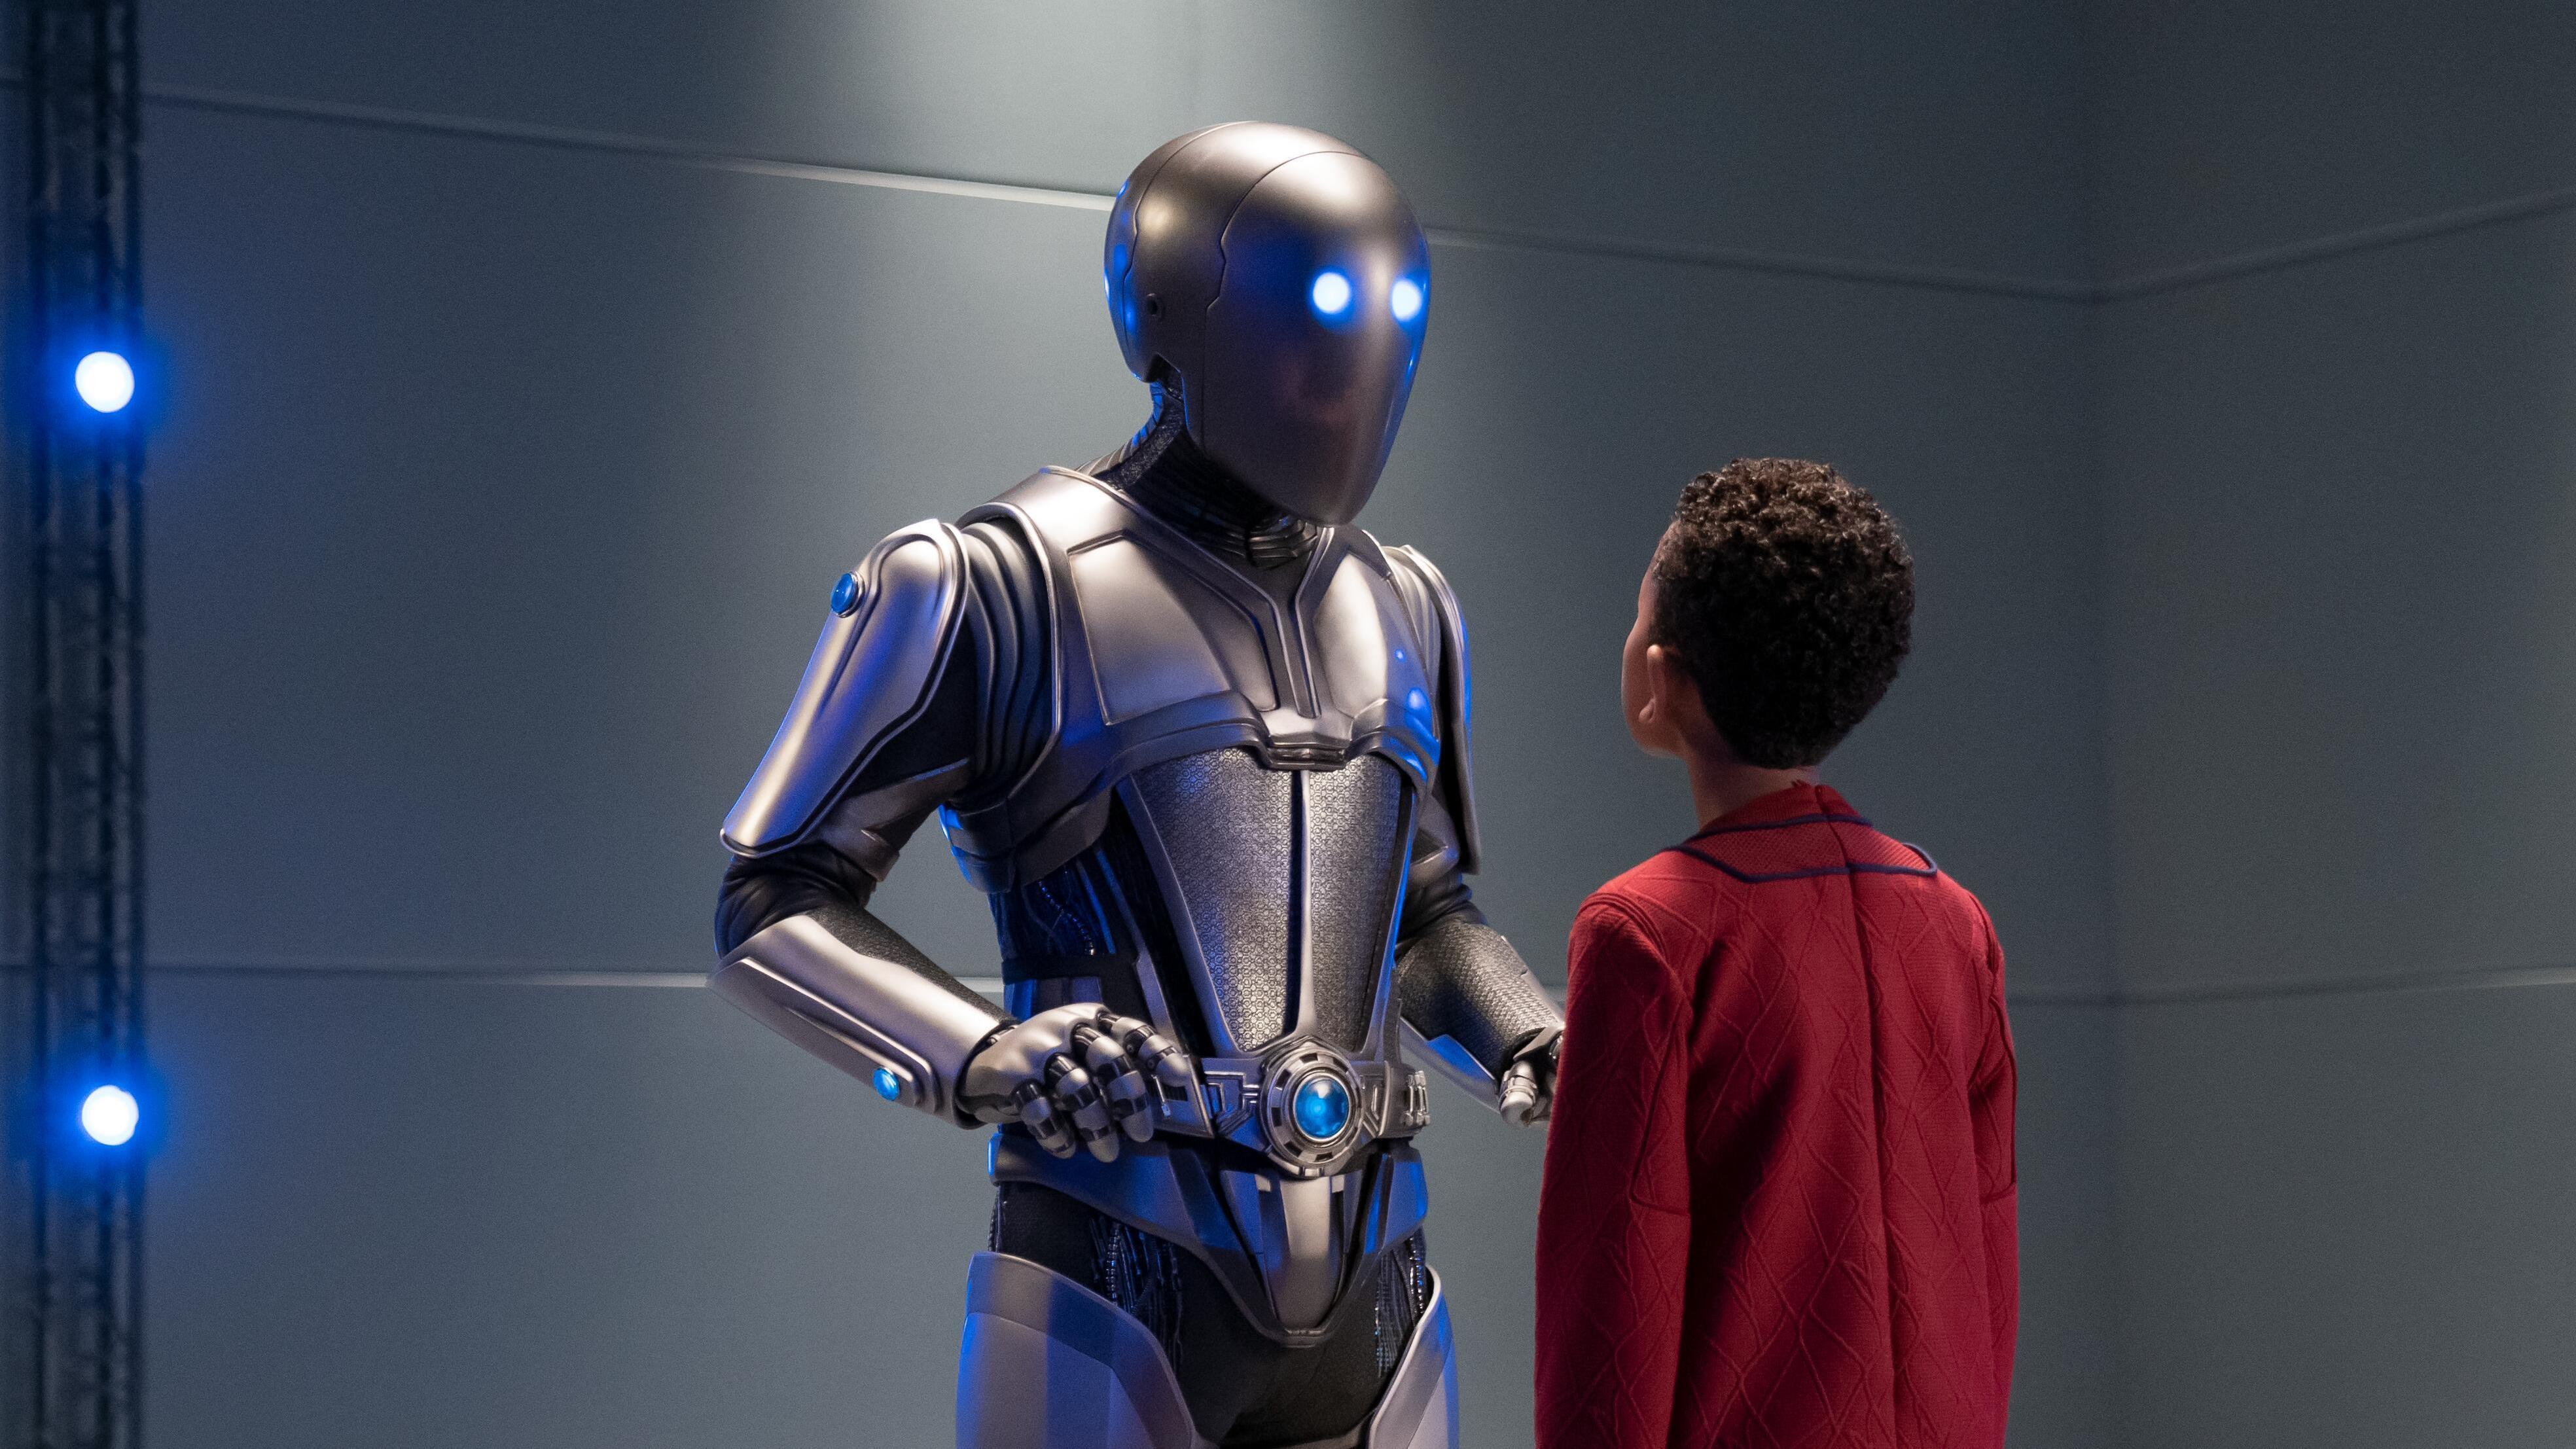 The Orville: New Horizons -- “Electric Sheep” - Episode 301 - The Orville crew deals with the interpersonal aftermath of the battle against the Kaylon on the season three premiere of “The Orville: New Horizons”. Isaac (Mark Jackson) and Ty Finn (Kai Wener), shown. (Photo by: Michael Desmond/Hulu)